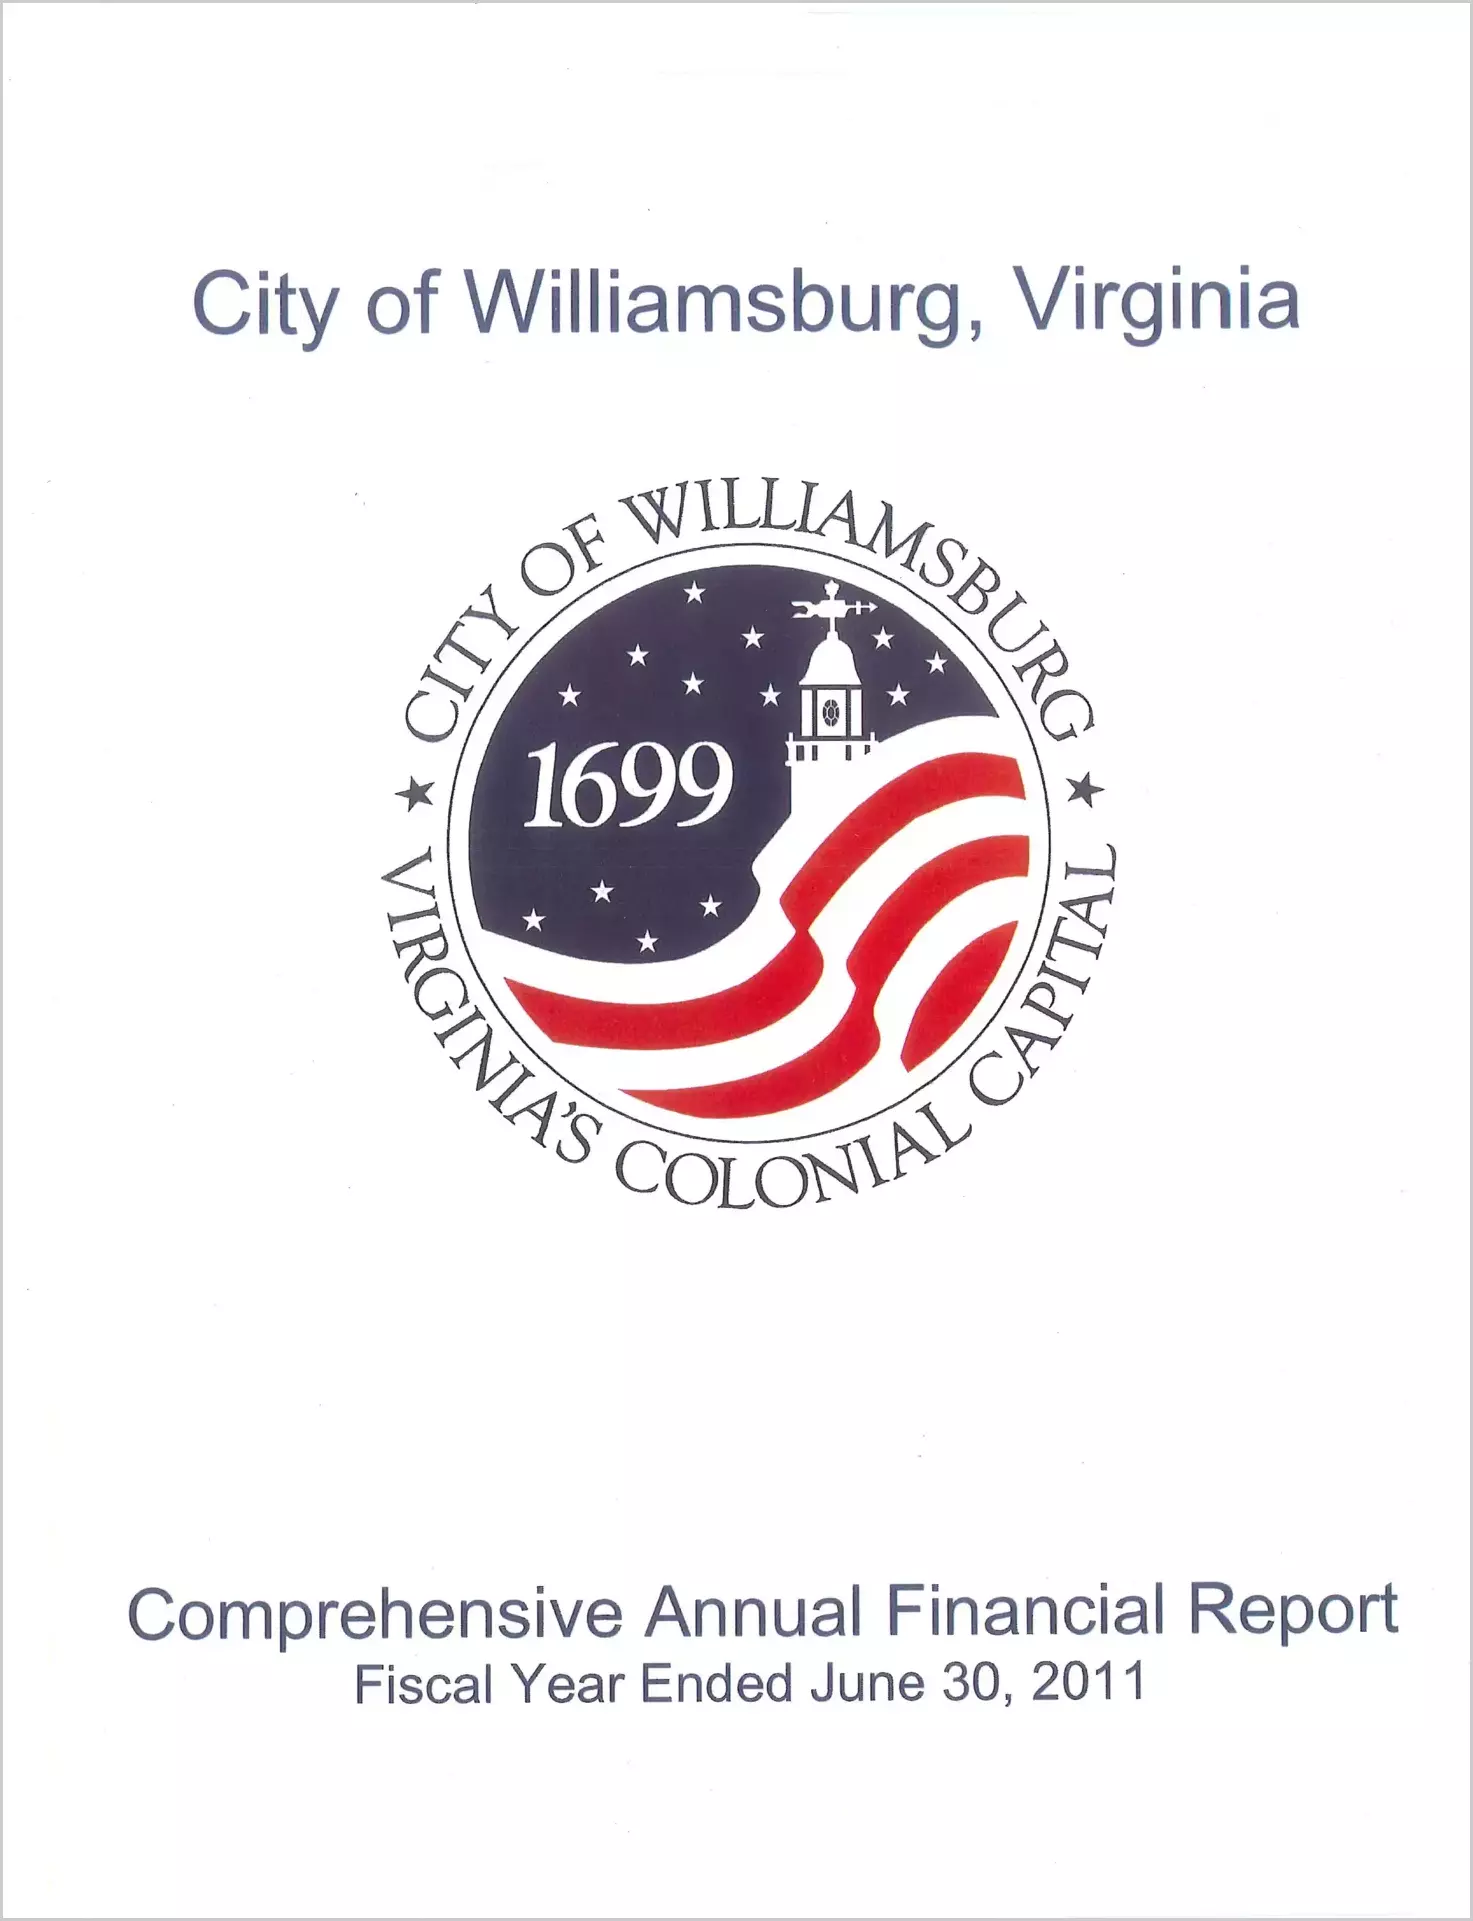 2011 Annual Financial Report for City of Williamsburg